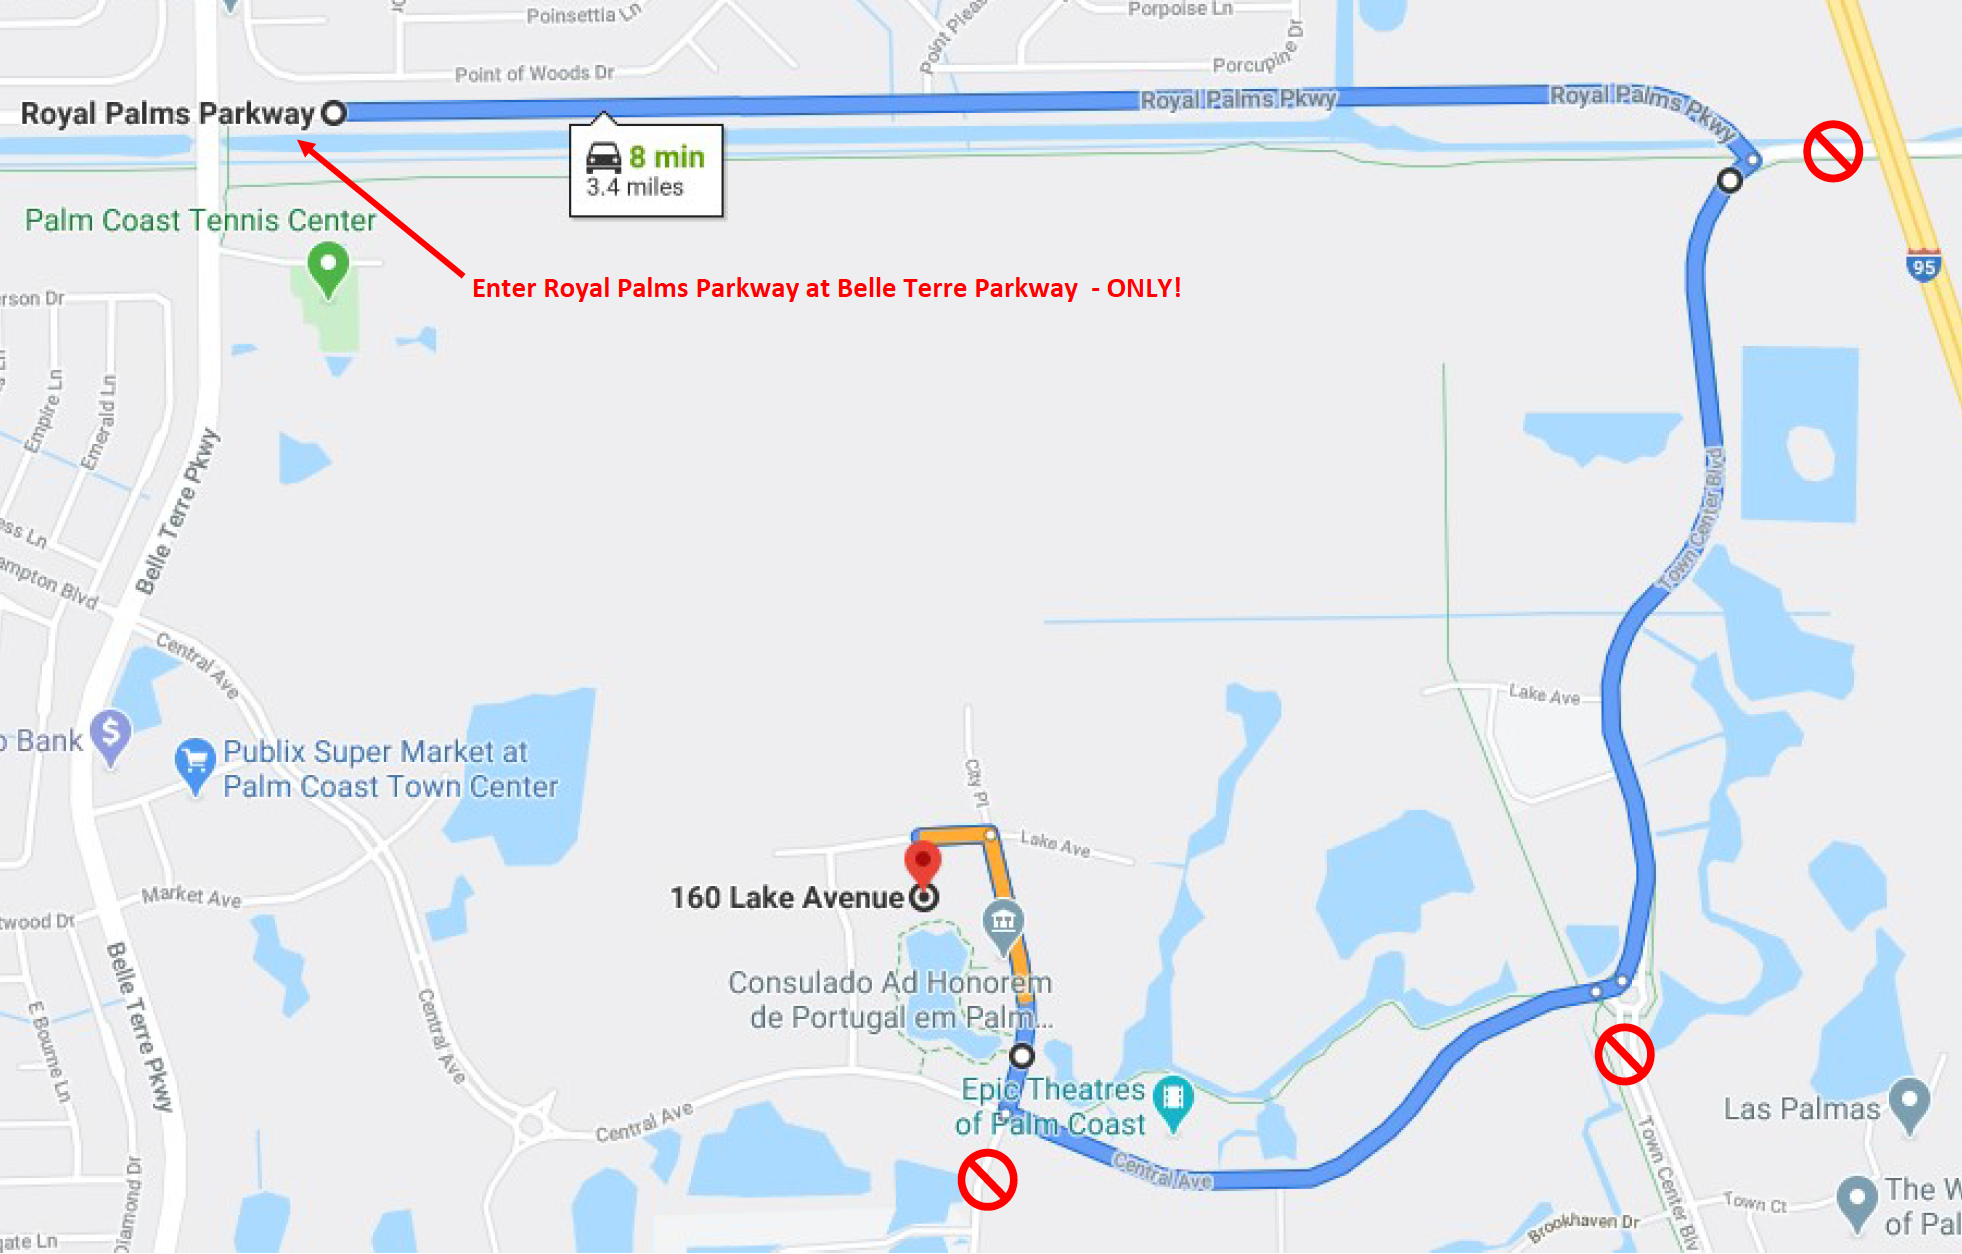 The traffic flow pattern for food distribution on May 2 at the City Hall location. Image courtesy of the city of Palm Coast